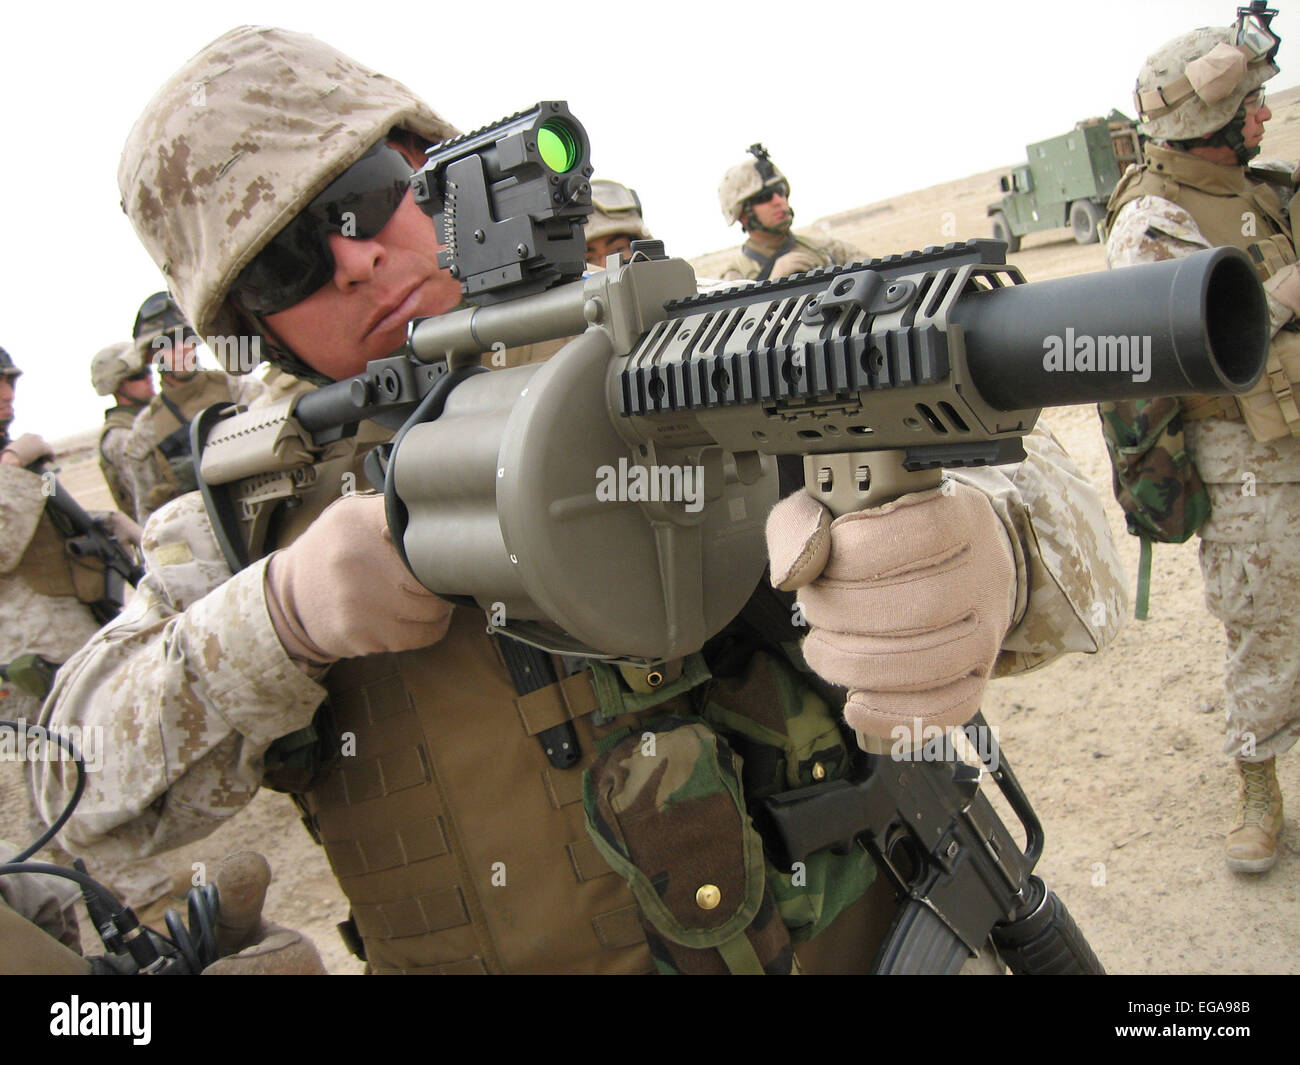 US MARINE aiming a M-32 Multiple shot Grenade Launcher,in 2006. It is an experimental six-barreled weapon that can deliver six 40 mm grenades in under three seconds.  Photo : US Marine Corps Stock Photo